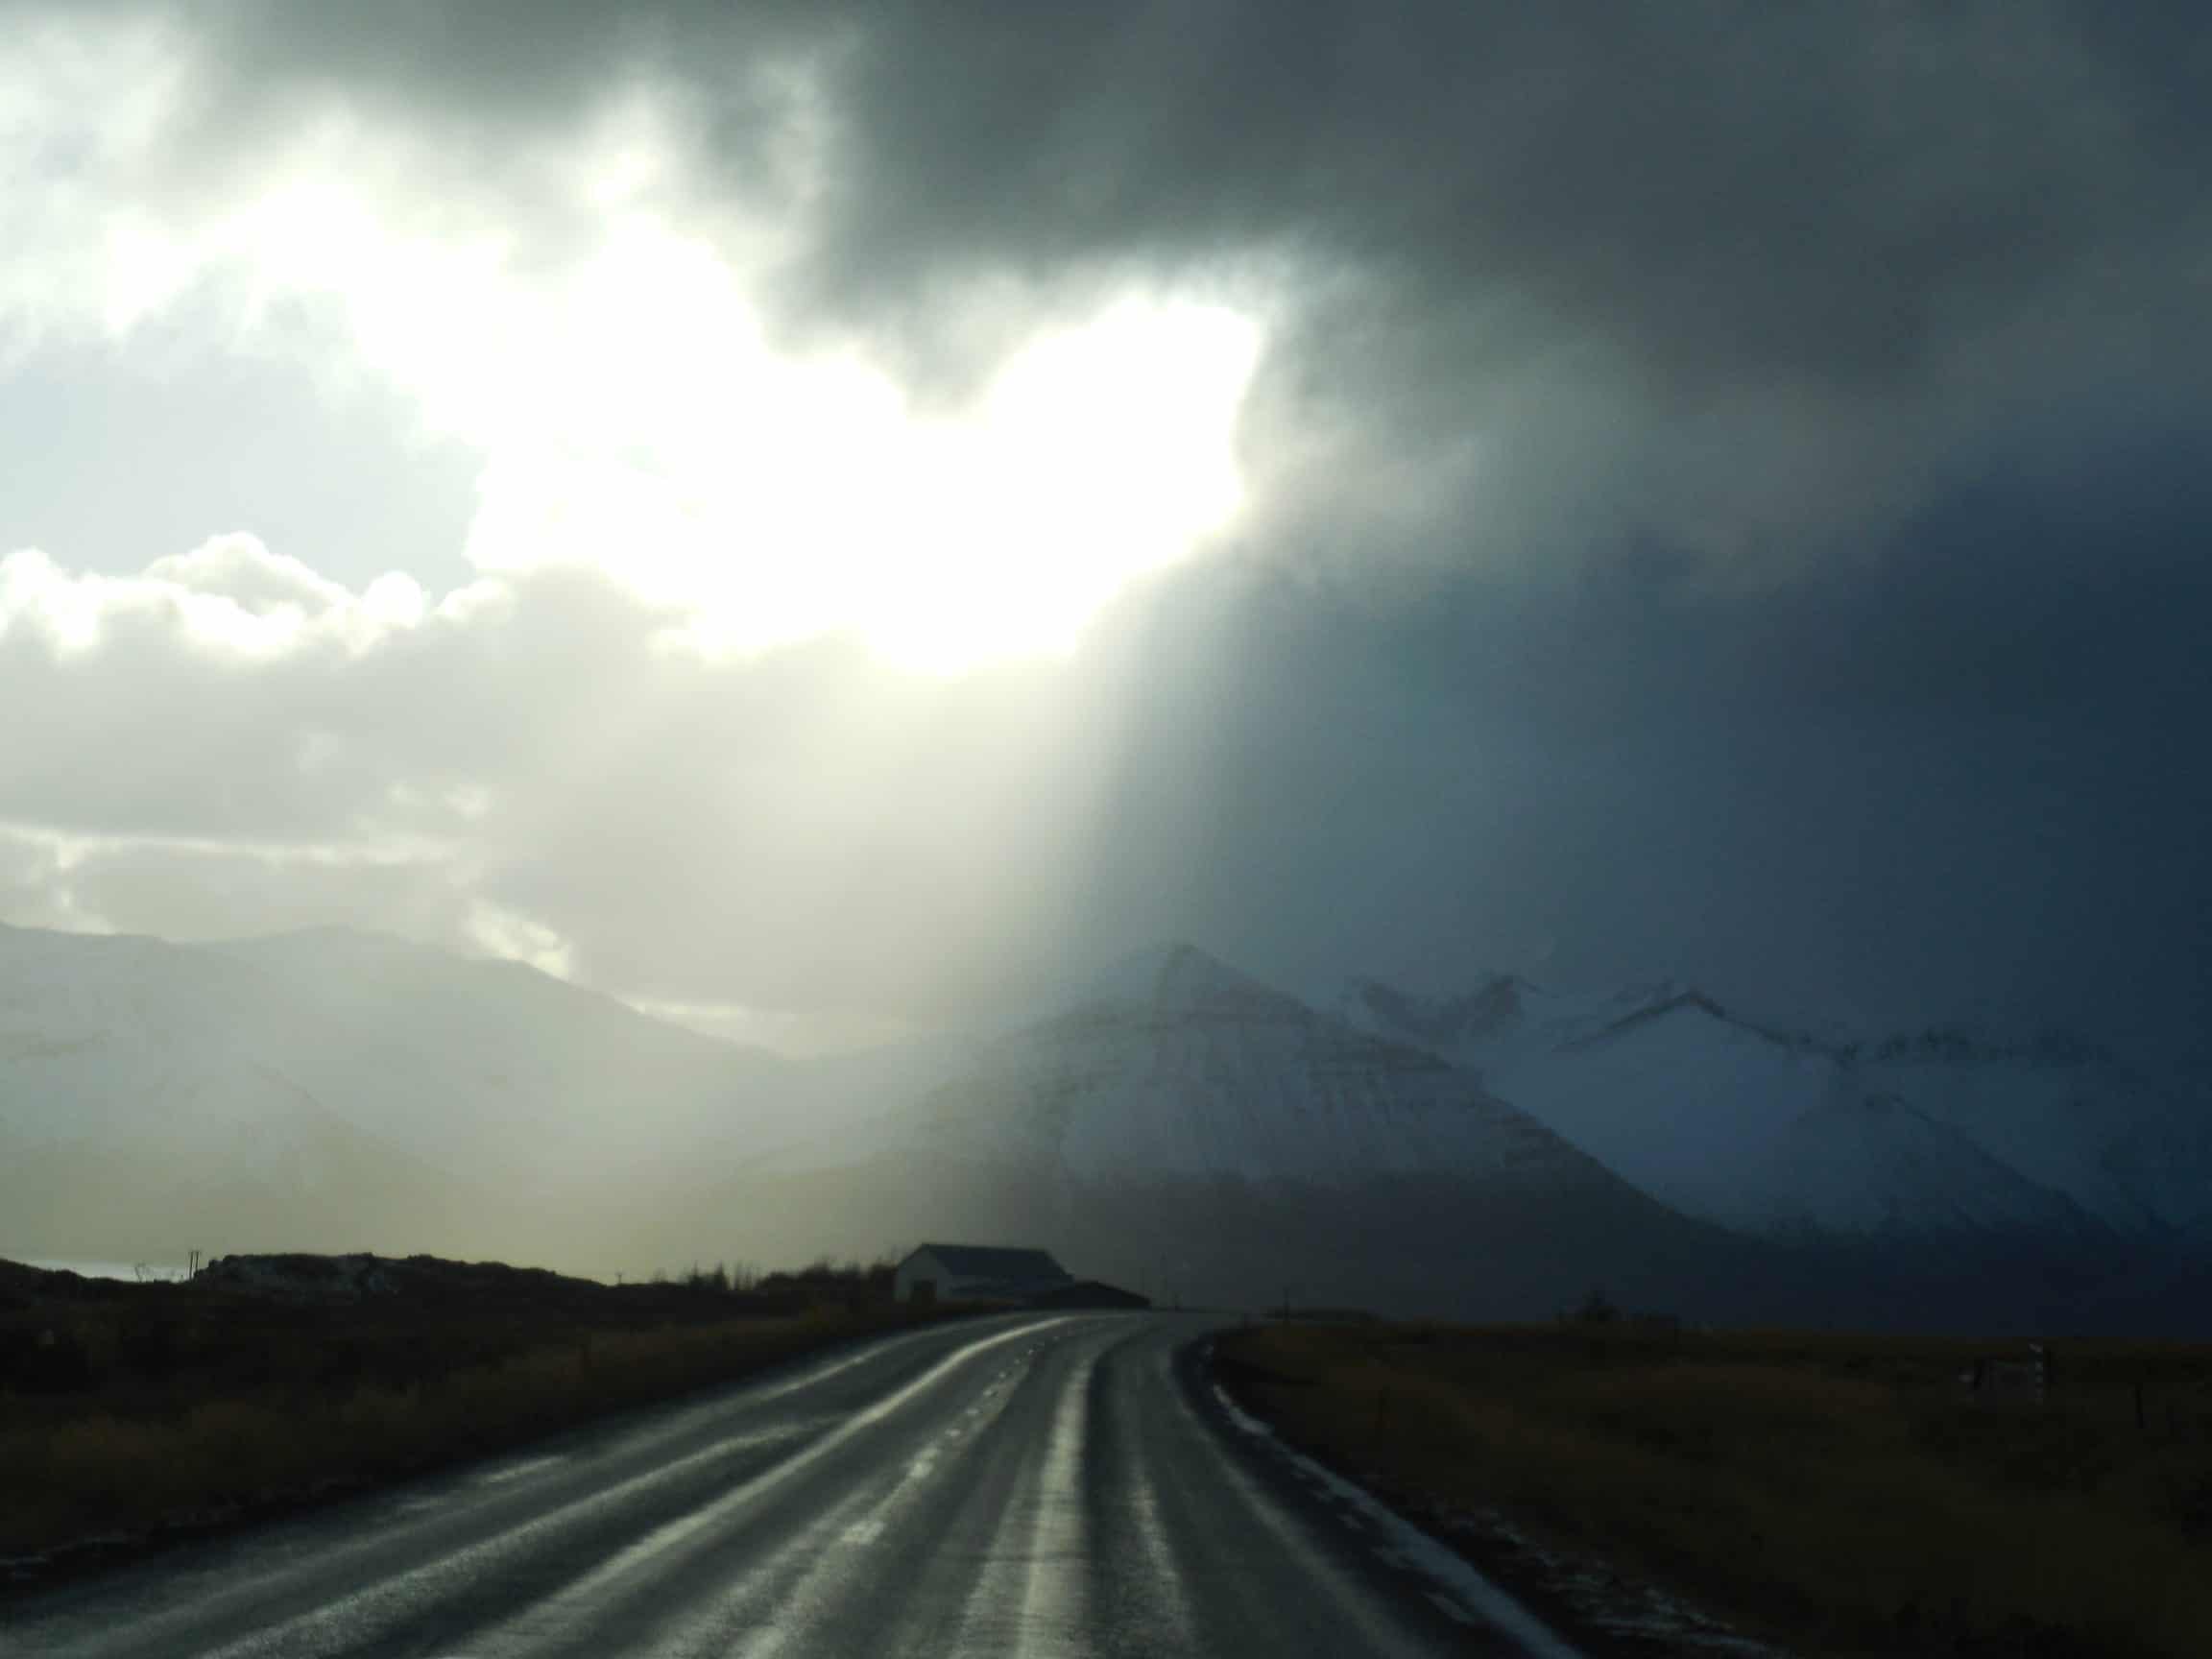 On the road in Iceland